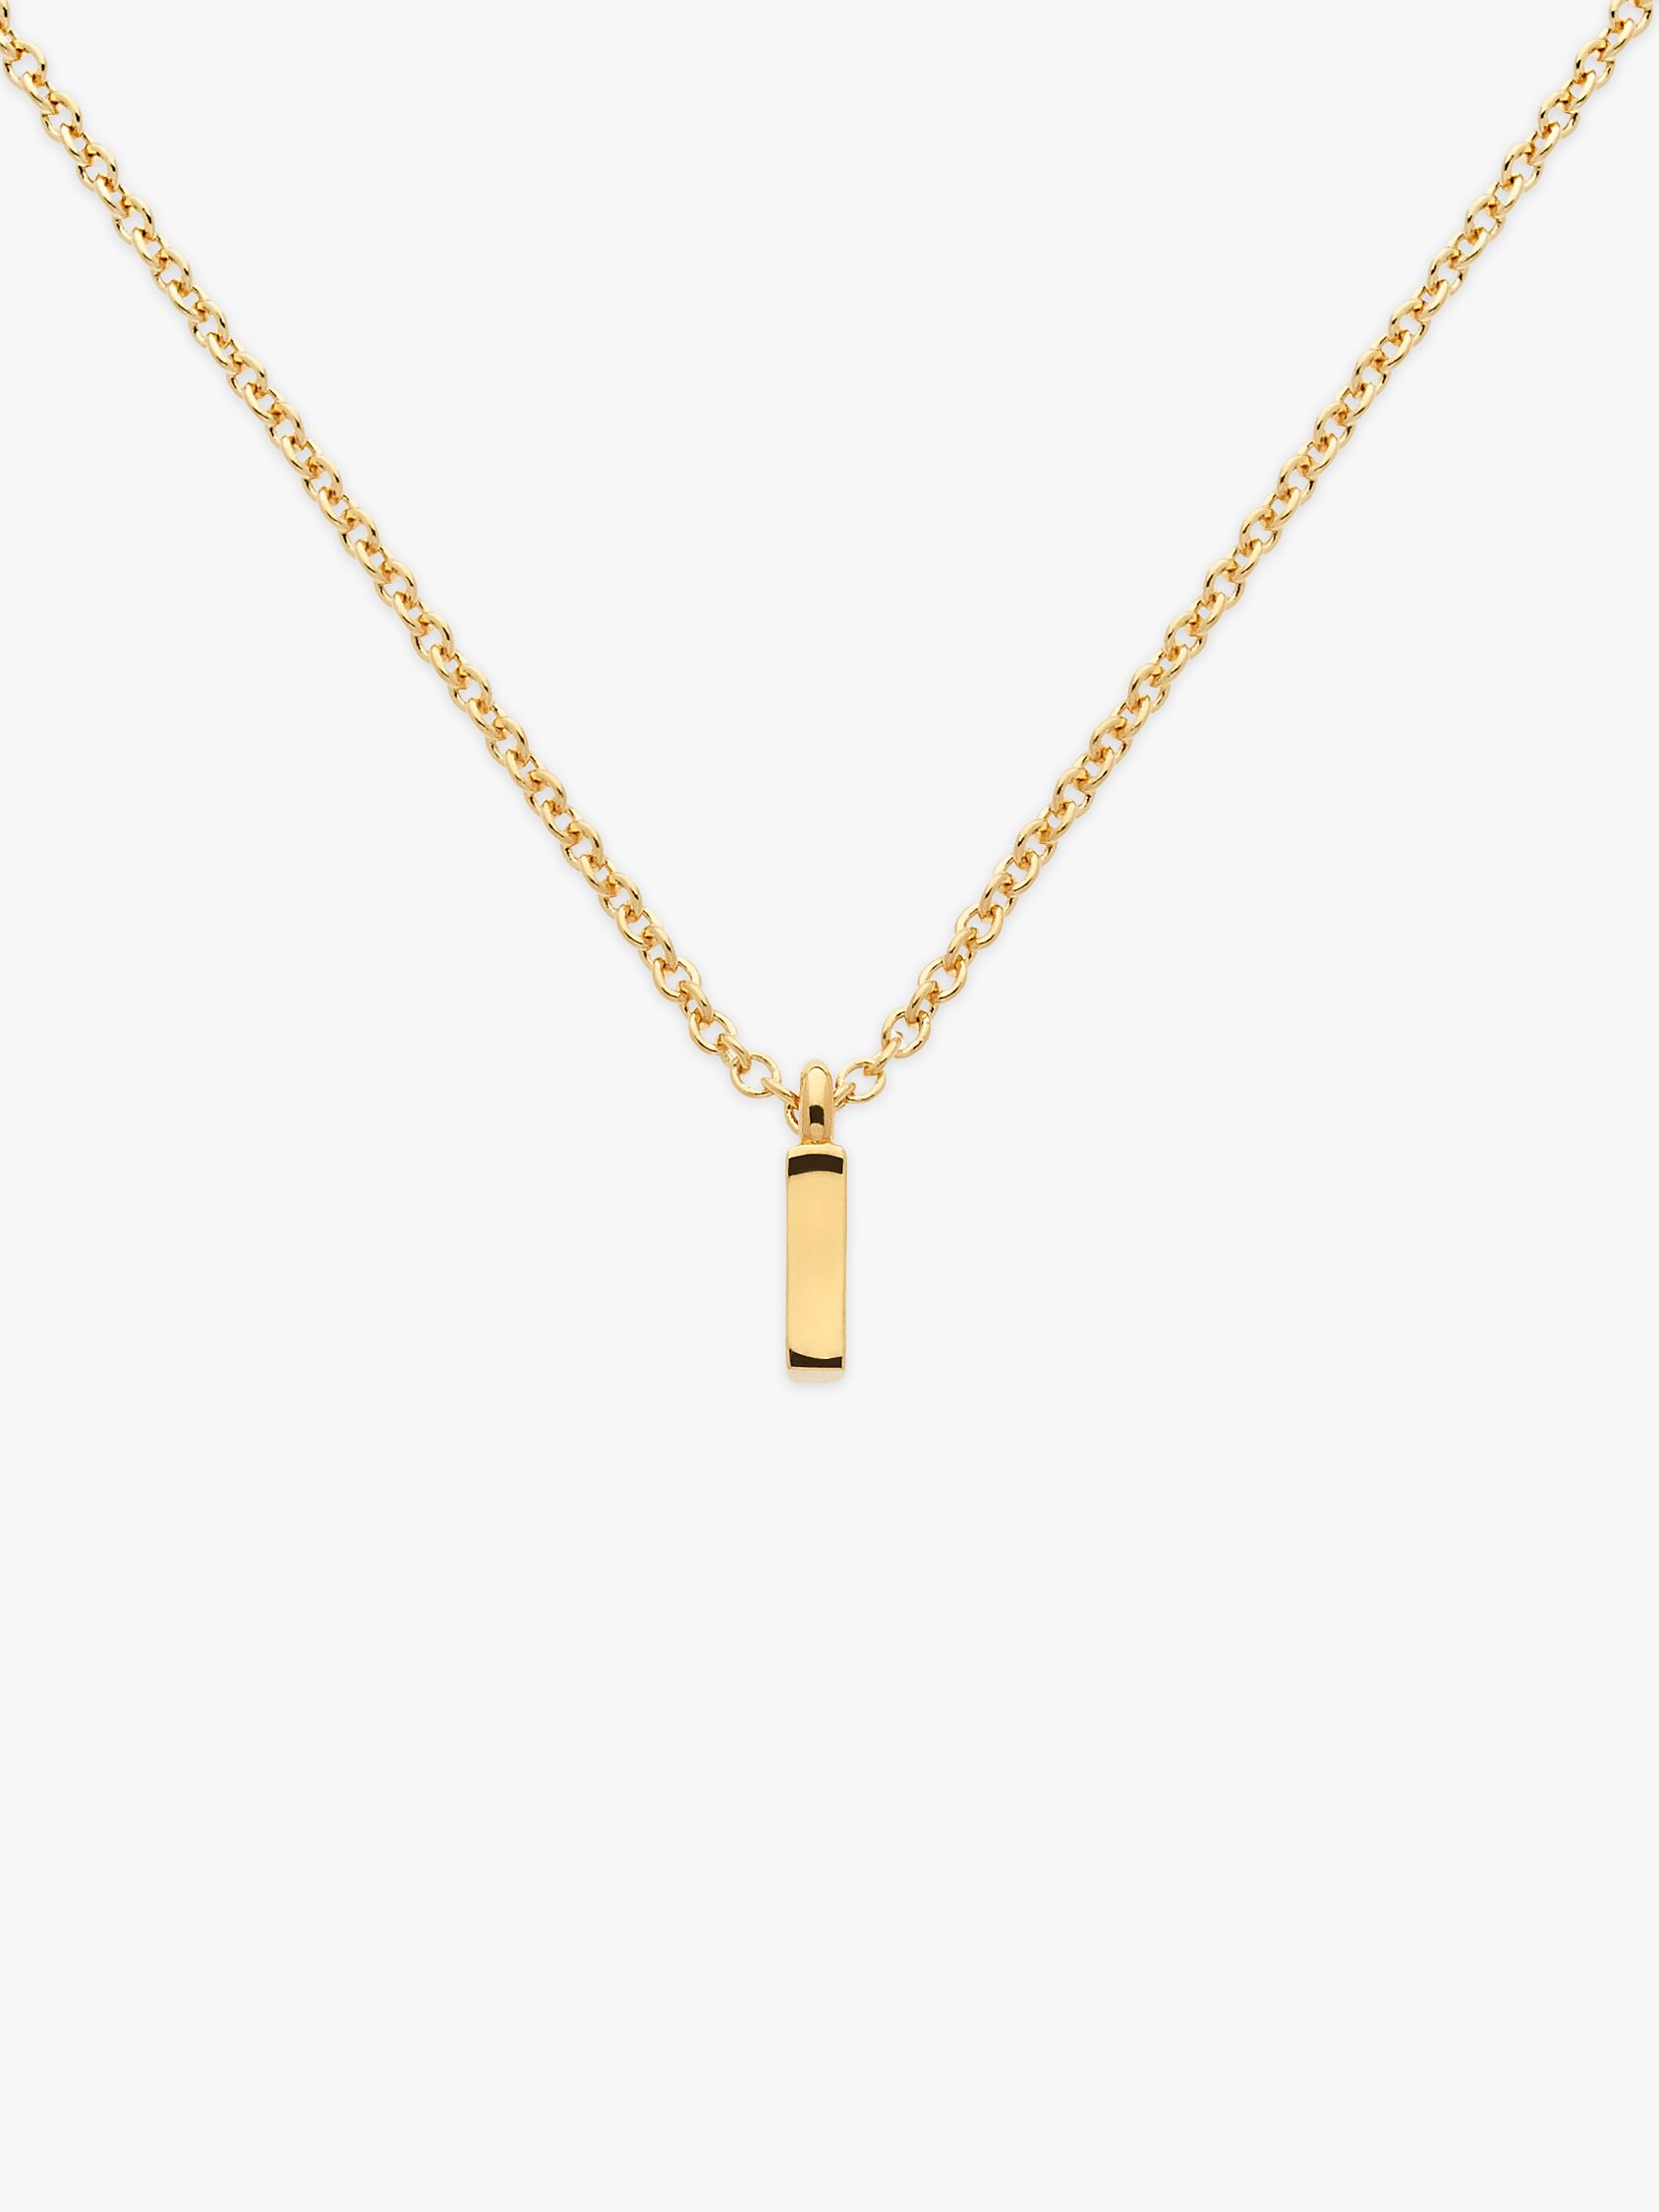 Buy Melissa Odabash Gold Plated Initial Pendant Necklace Online at johnlewis.com